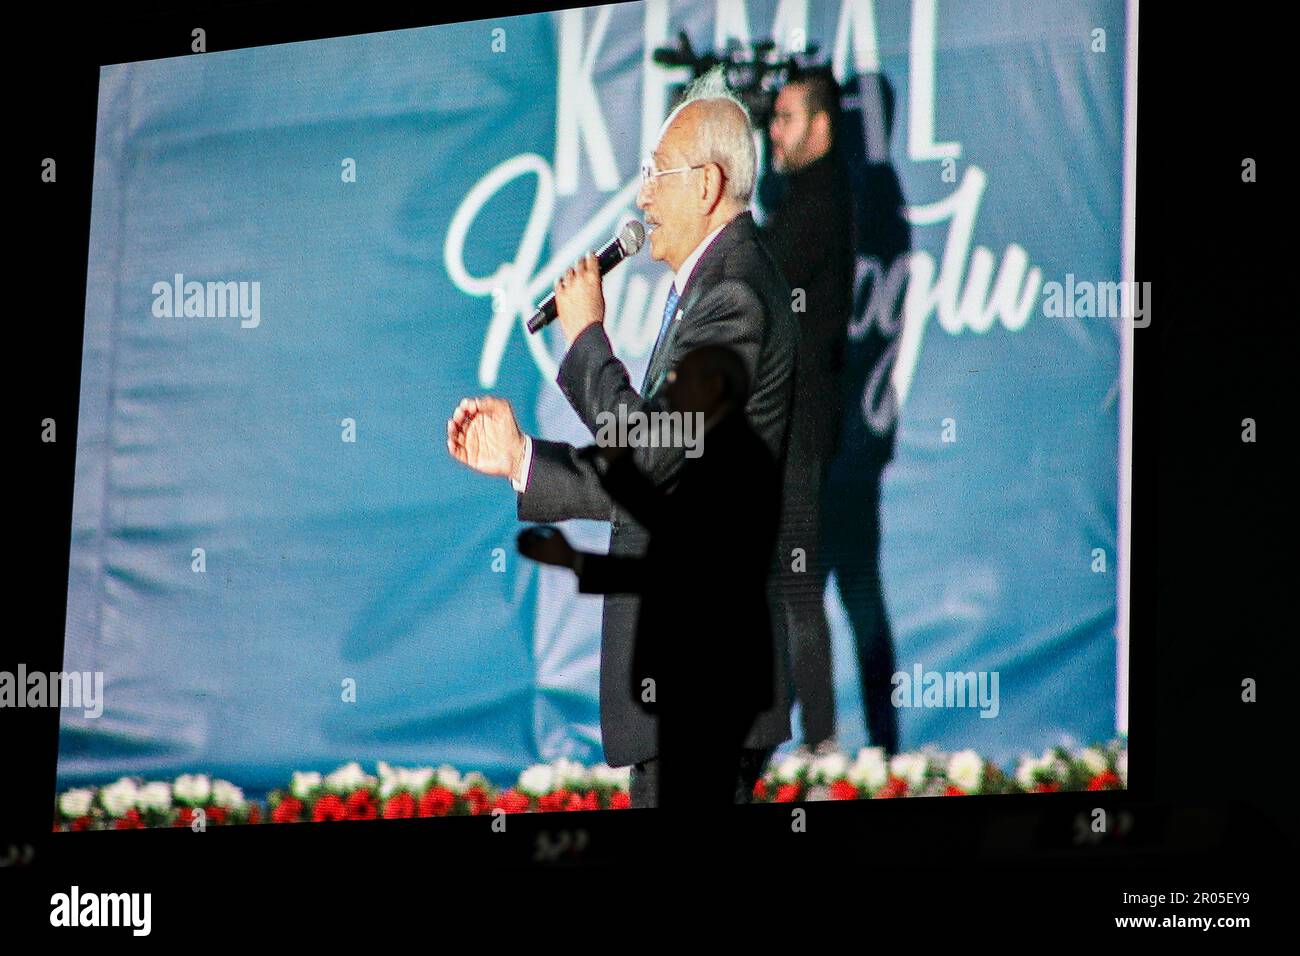 CHP Chairman and 13th Presidential candidate Kemal K?l?çdaro?lu make speeches during the rally. Nation alliance components; CHP - Republican People's Party Chairman and 13th Presidential candidate Kemal K?l?çdaro?lu, SP - Saadet Party Chairman Temel Karamollaoglu, DEVA - Democracy and Progress Party Chairman Ali Babacan, DP - Democrat Party Chairman Gultekin Uysal, IYI Party - Good Party General President Meral Ak?ener and GP - Future Party Chairman Ahmet Davutoglu held a rally in Maltepe, Istanbul with a wide participation. Stock Photo